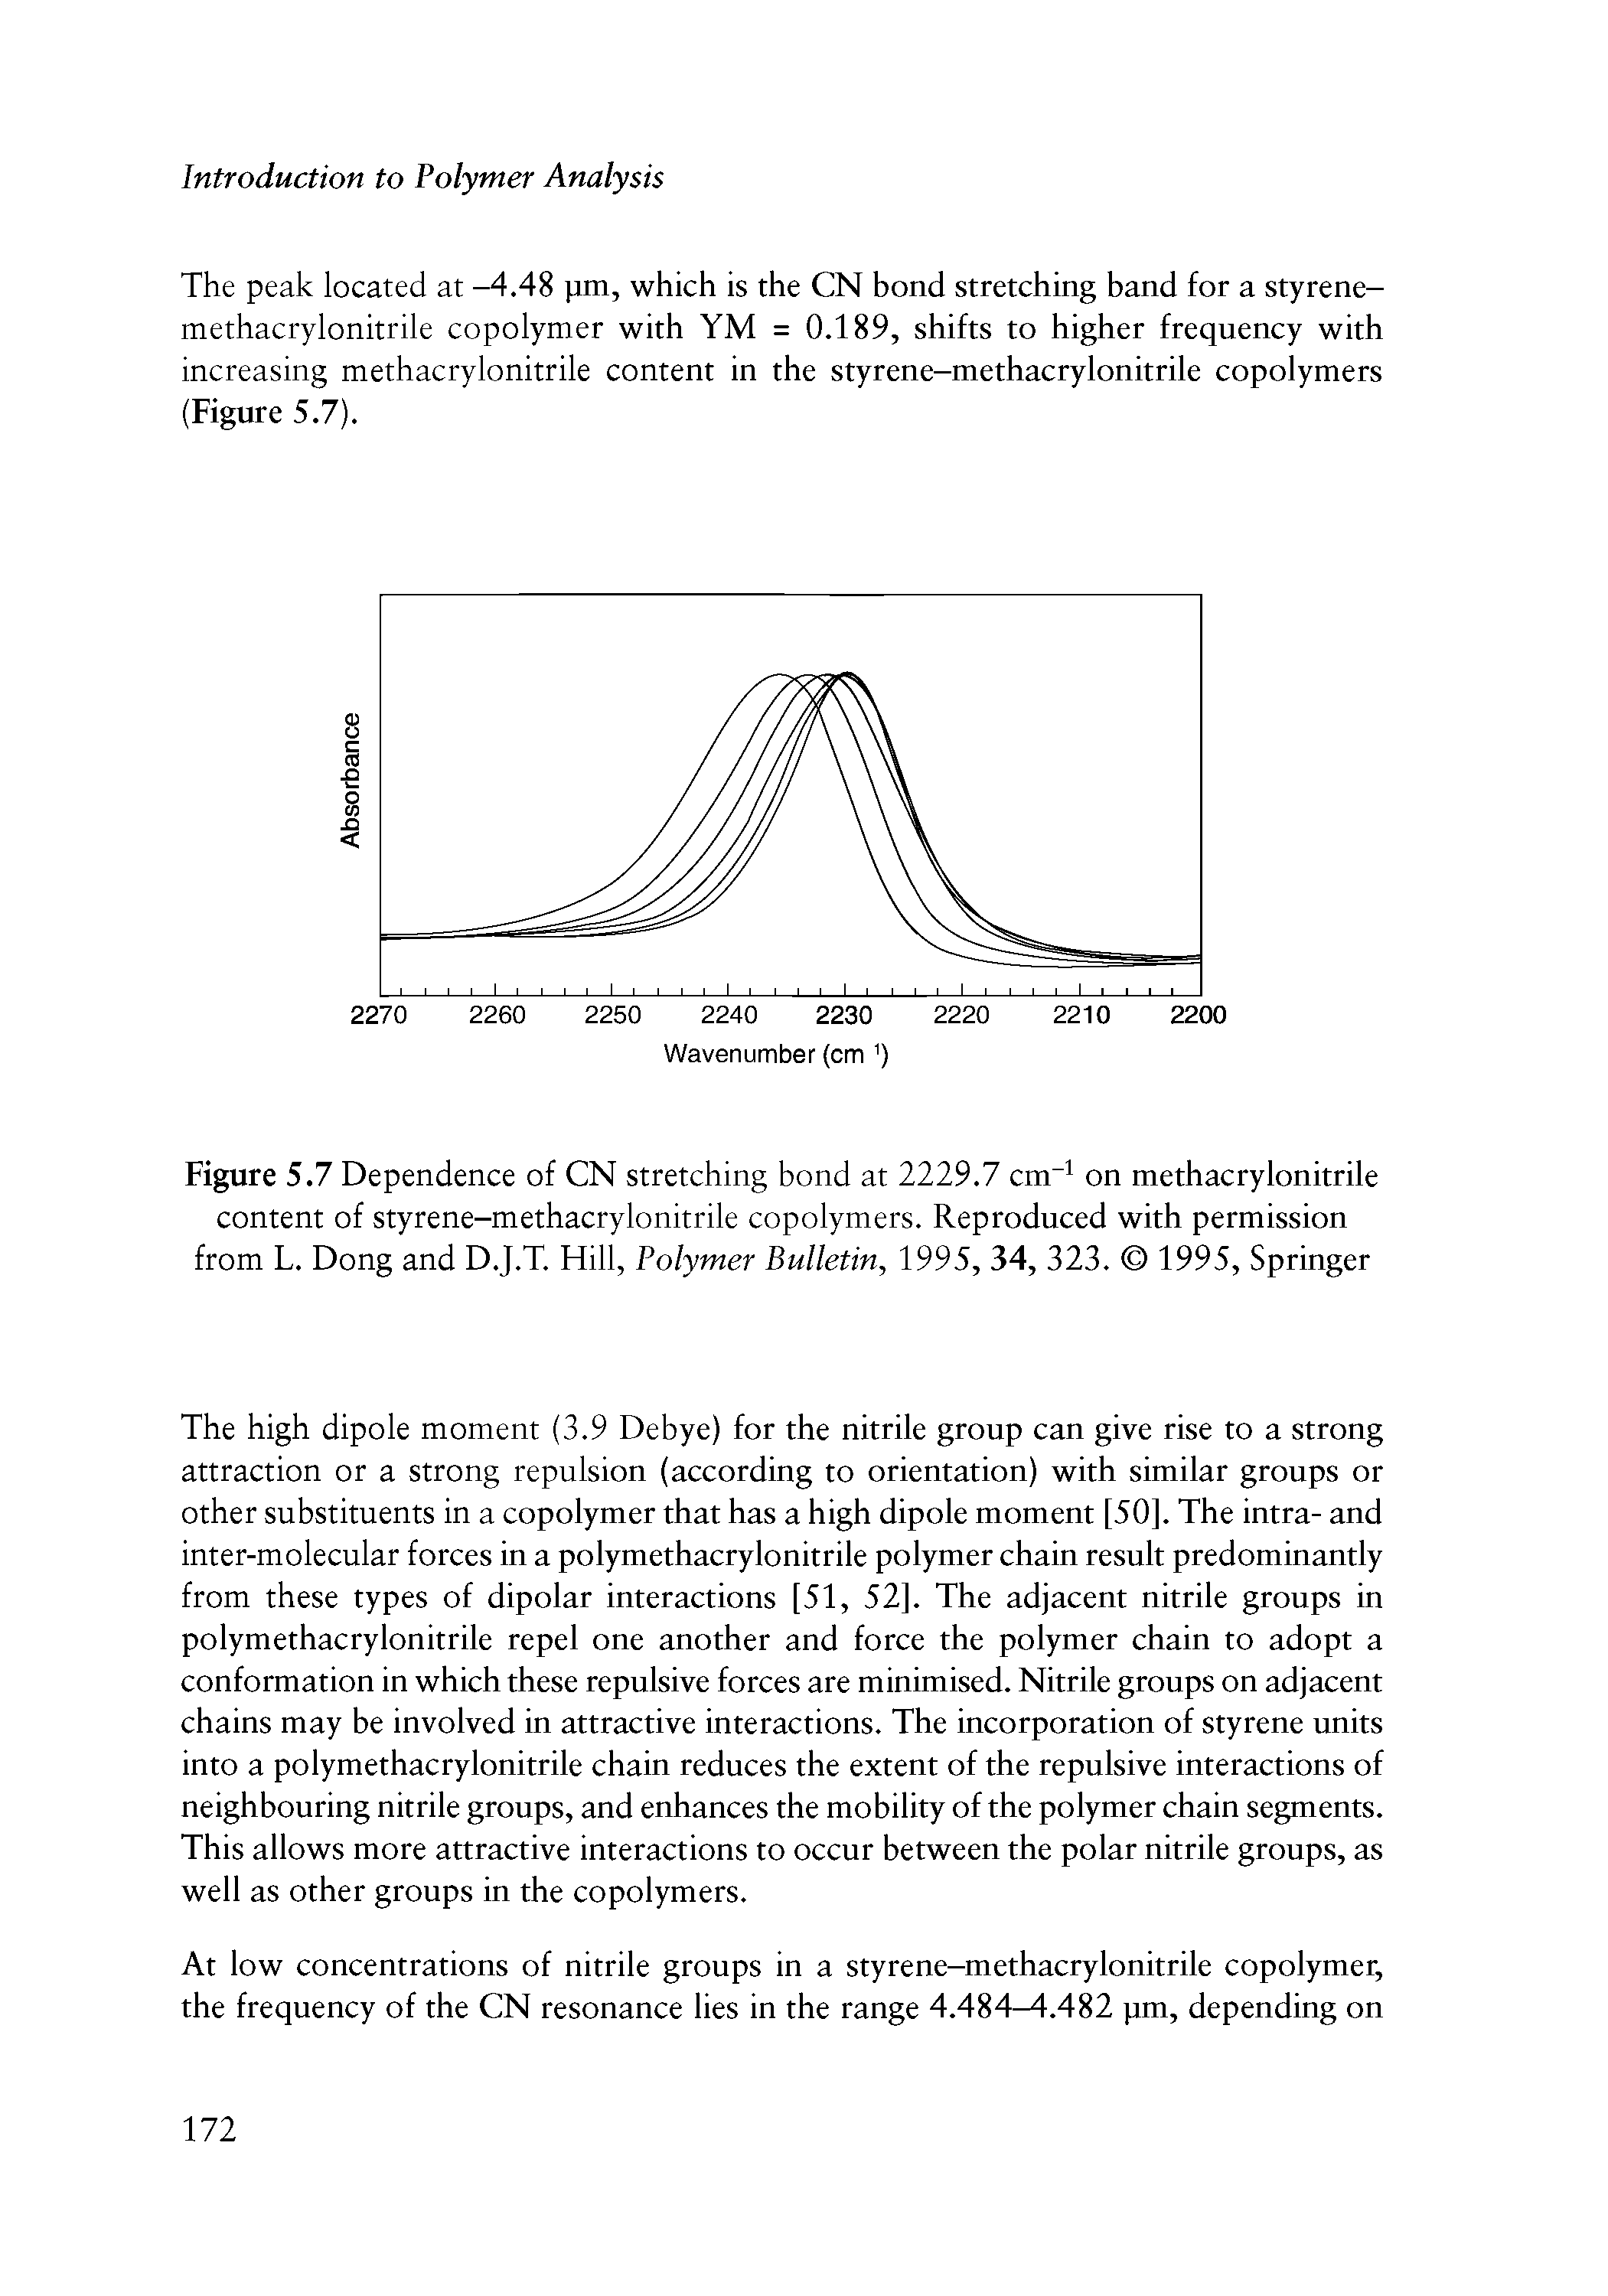 Figure 5.7 Dependence of CN stretching bond at 2229.7 cm i on methacrylonitrile content of styrene-methacrylonitrile copolymers. Reproduced with permission from L. Dong and D.J.T. Hill, Polymer Bulletin, 1995, 34, 323. 1995, Springer...